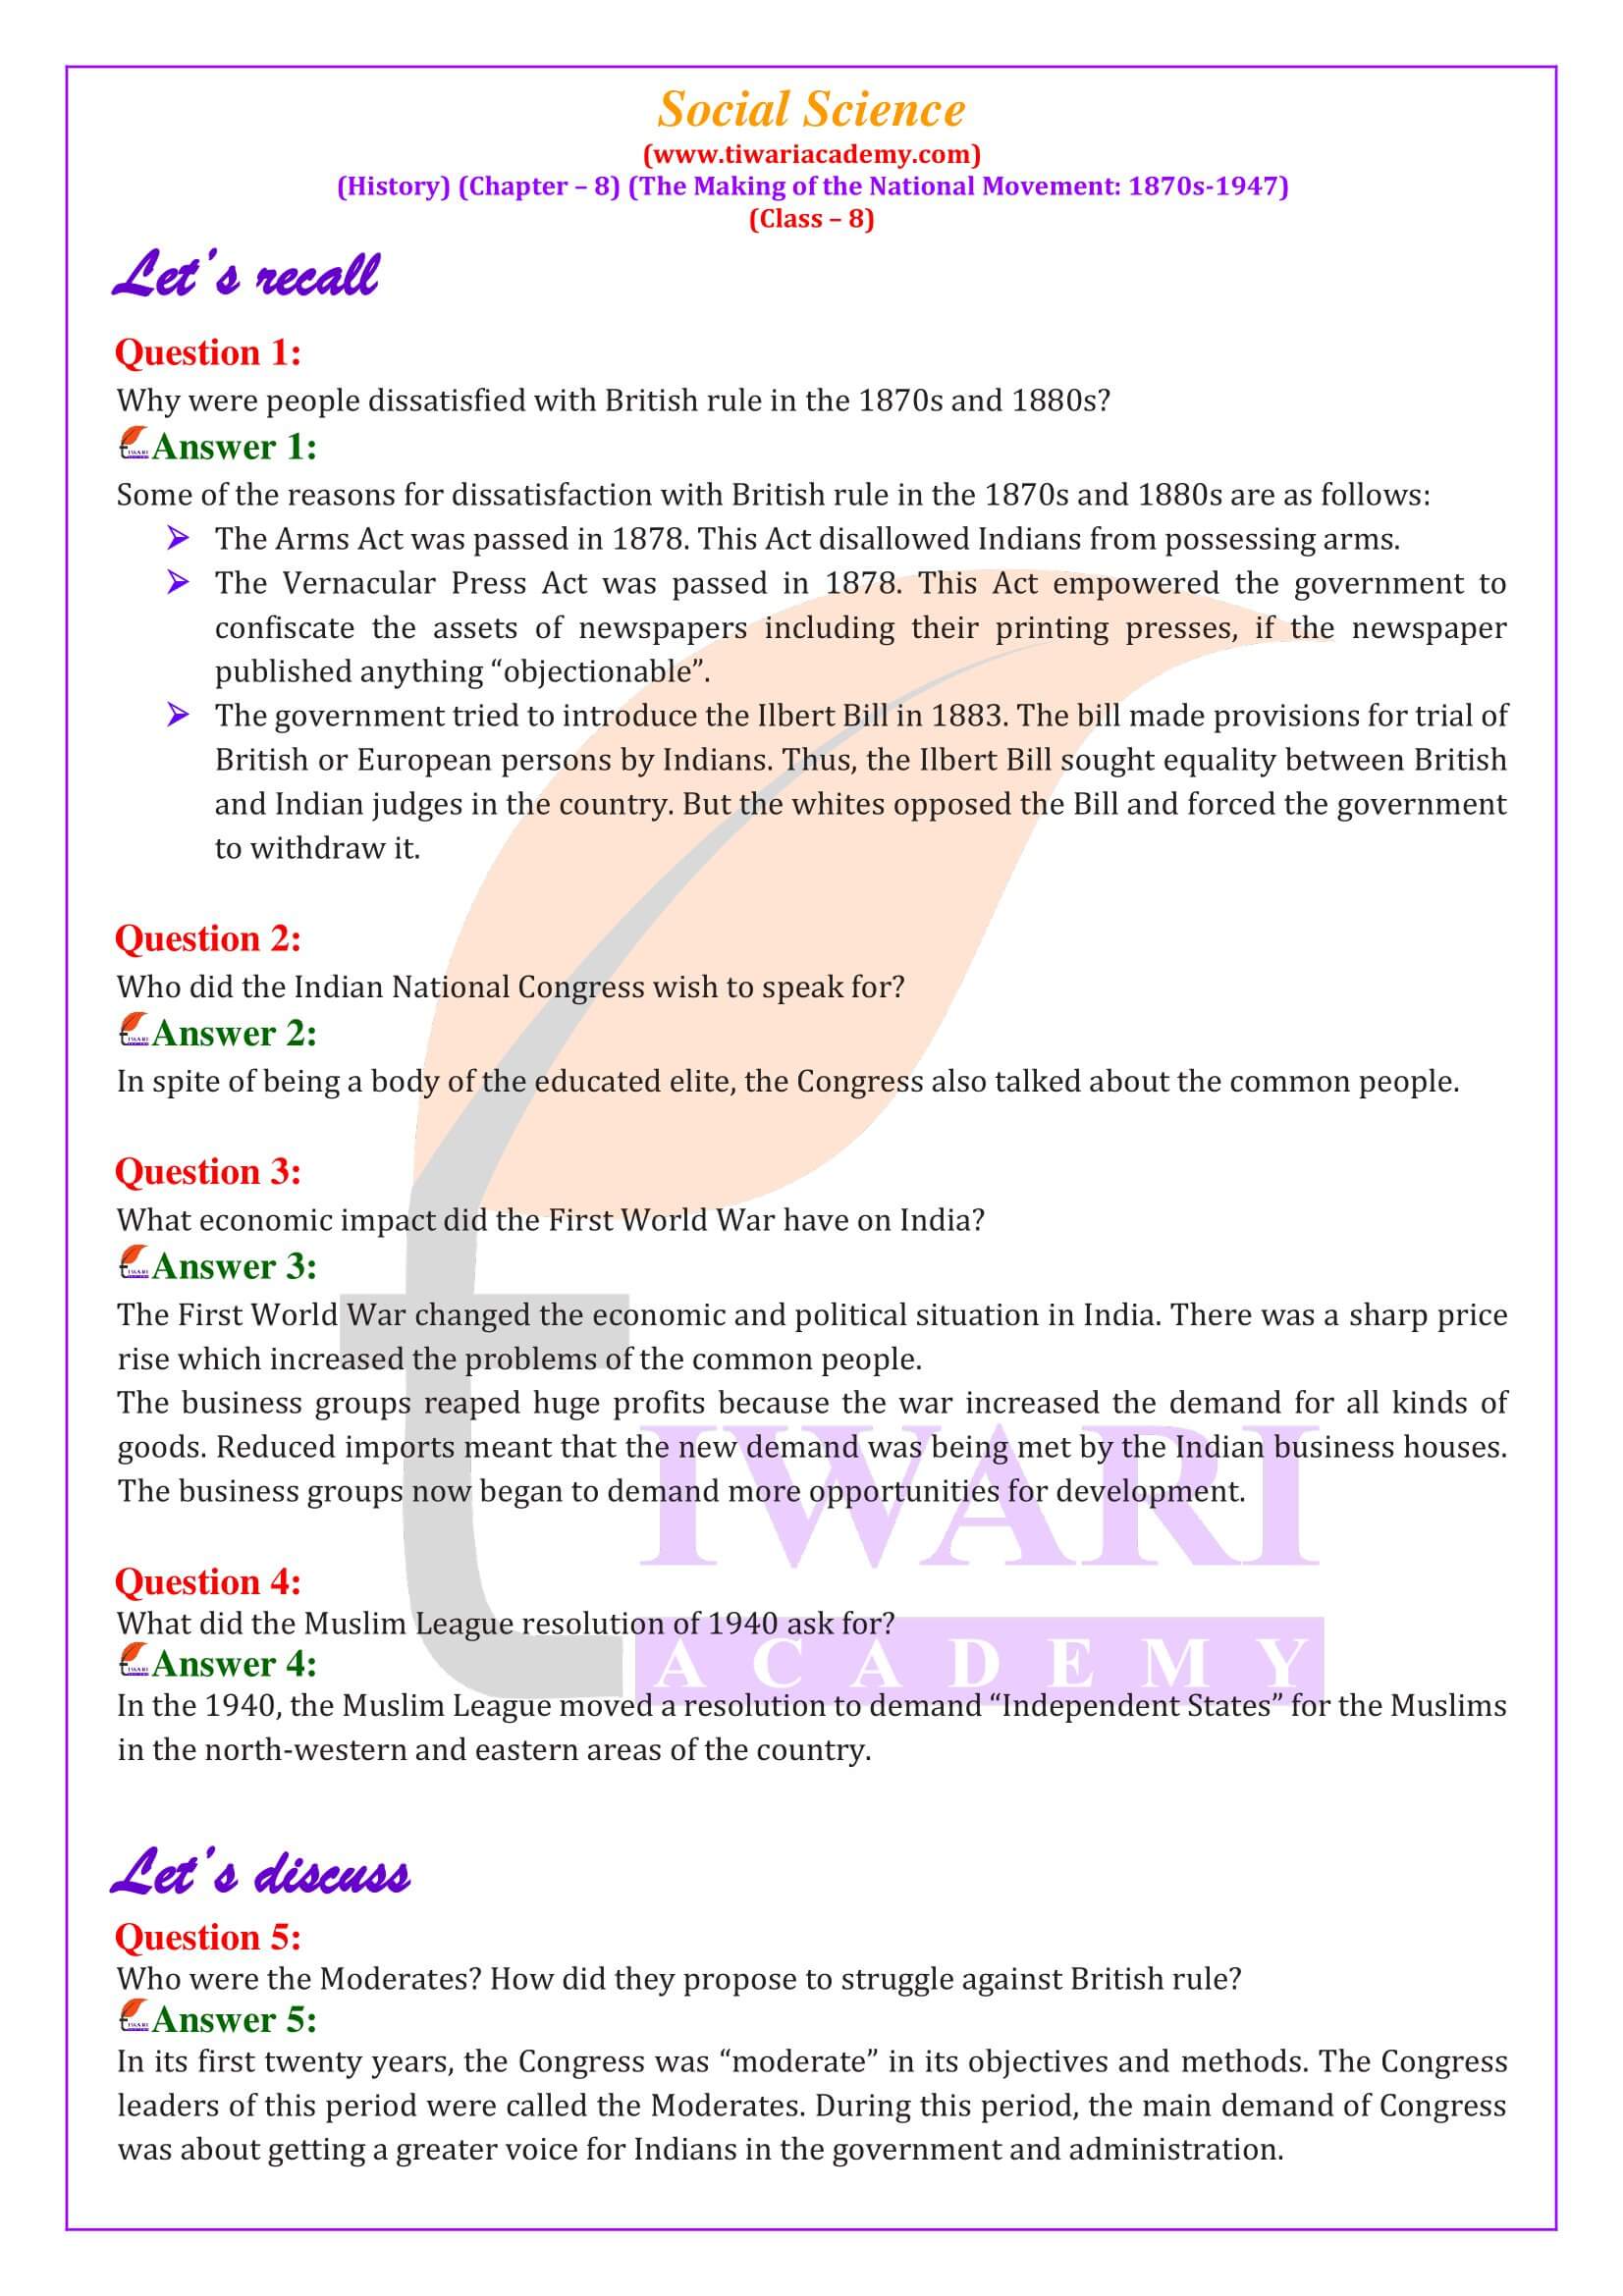 case study questions class 8 social science history chapter 2